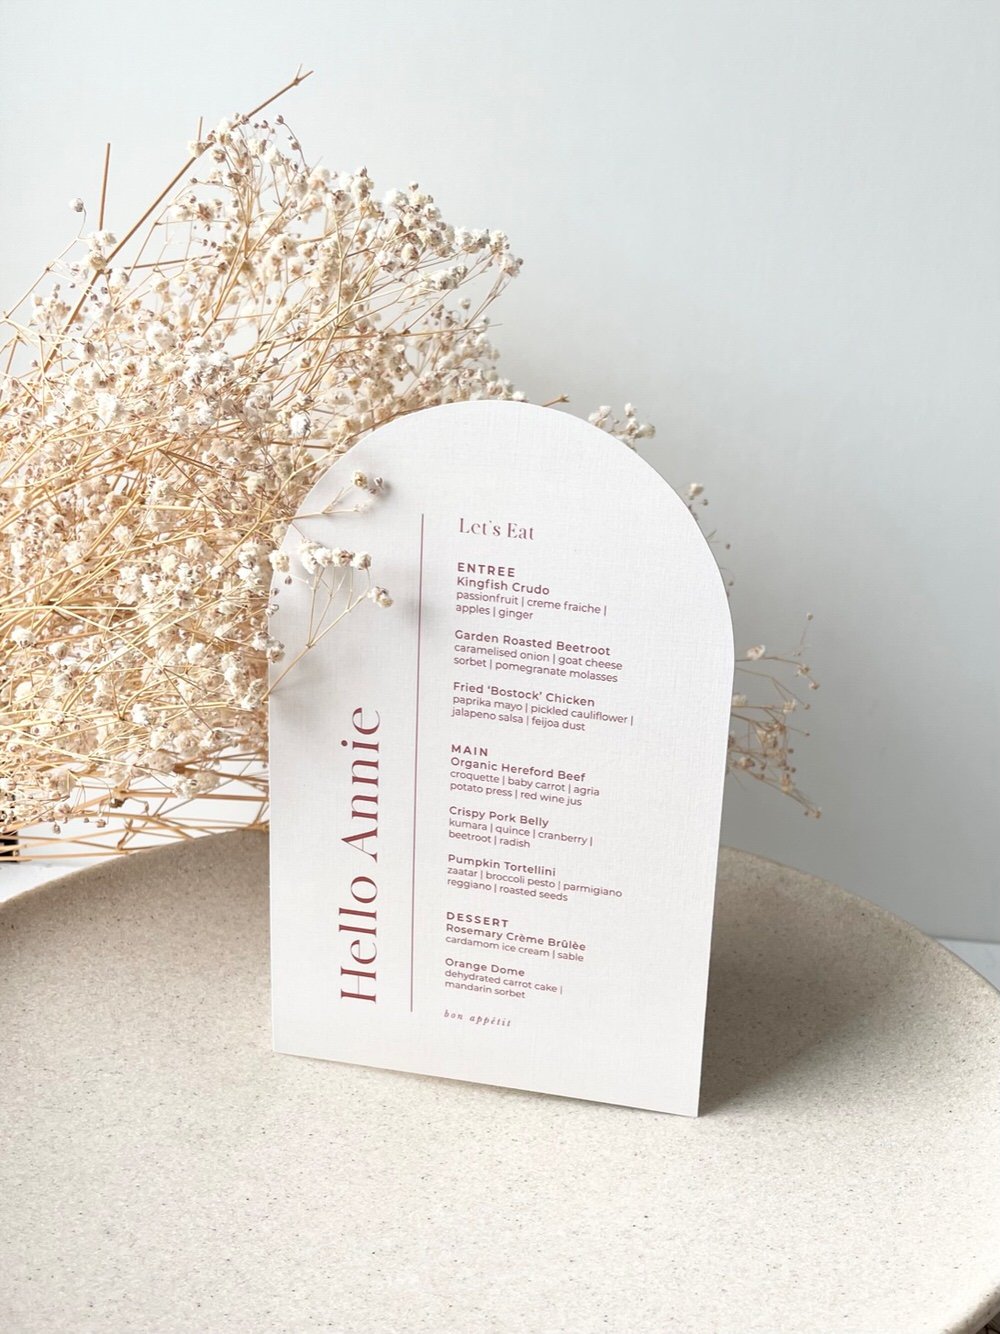 Just My Type Wedding Invitation Stationery NZ Wedding Menu Place Name Table Number1470.jpg